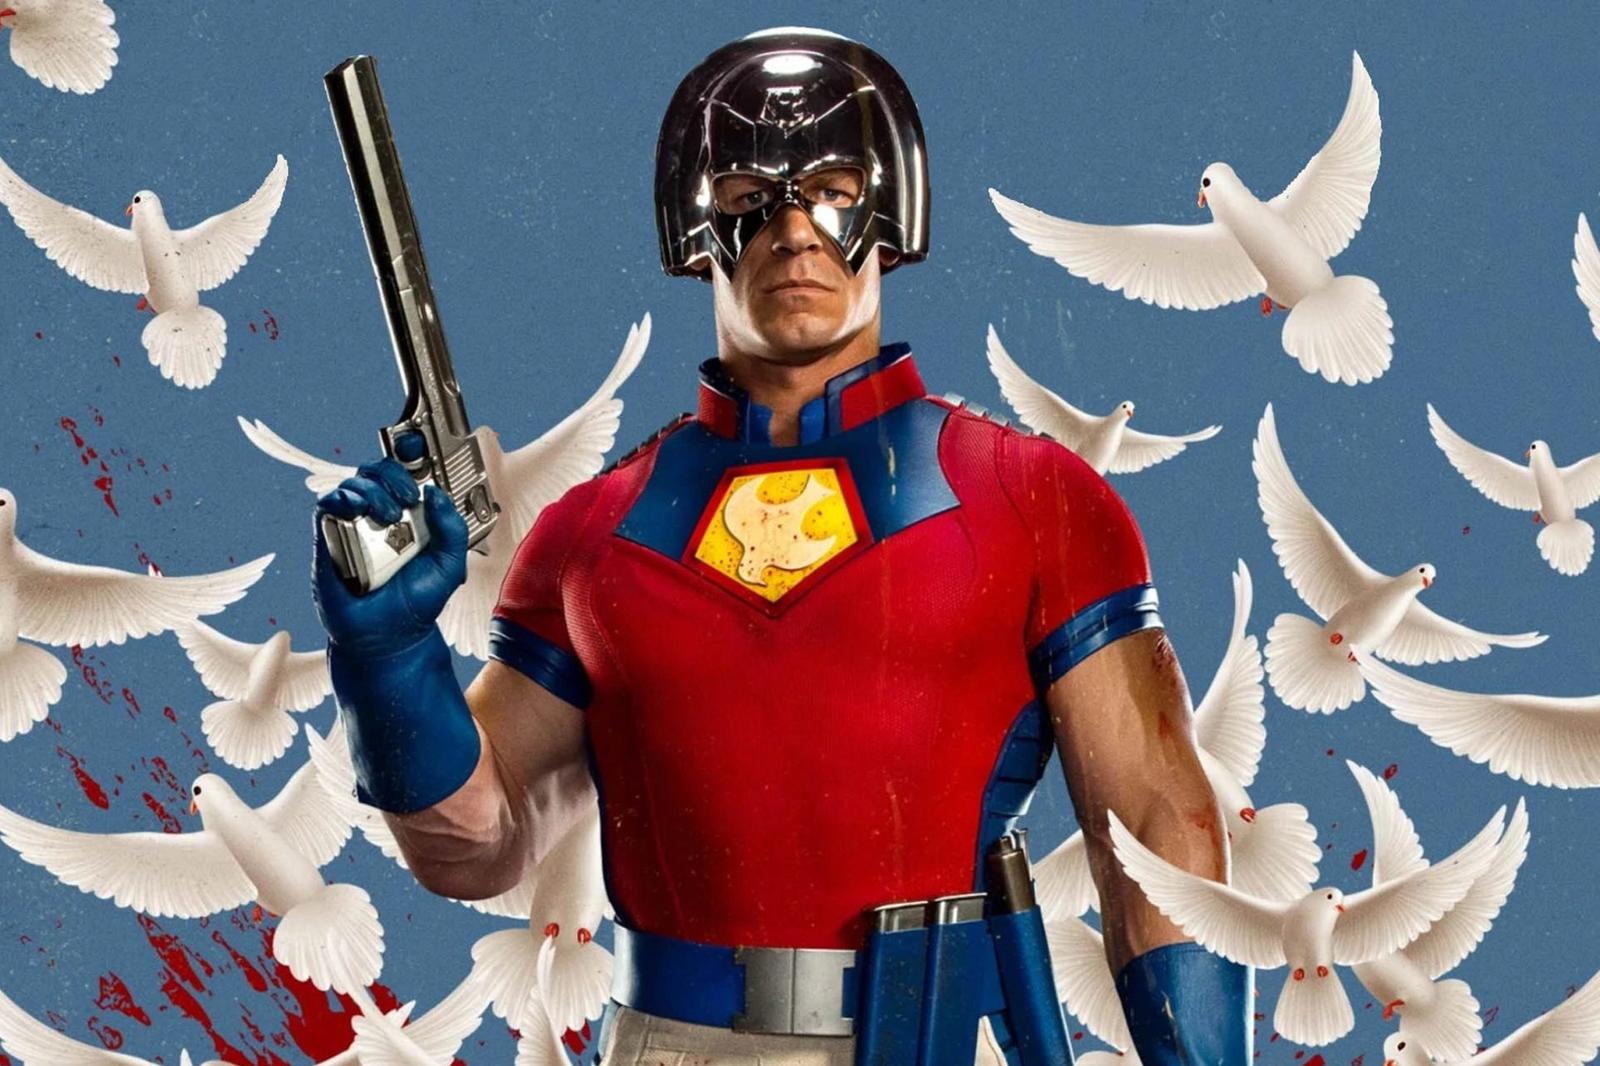 John Cena's Peacemaker holds a gun while doves fly around.